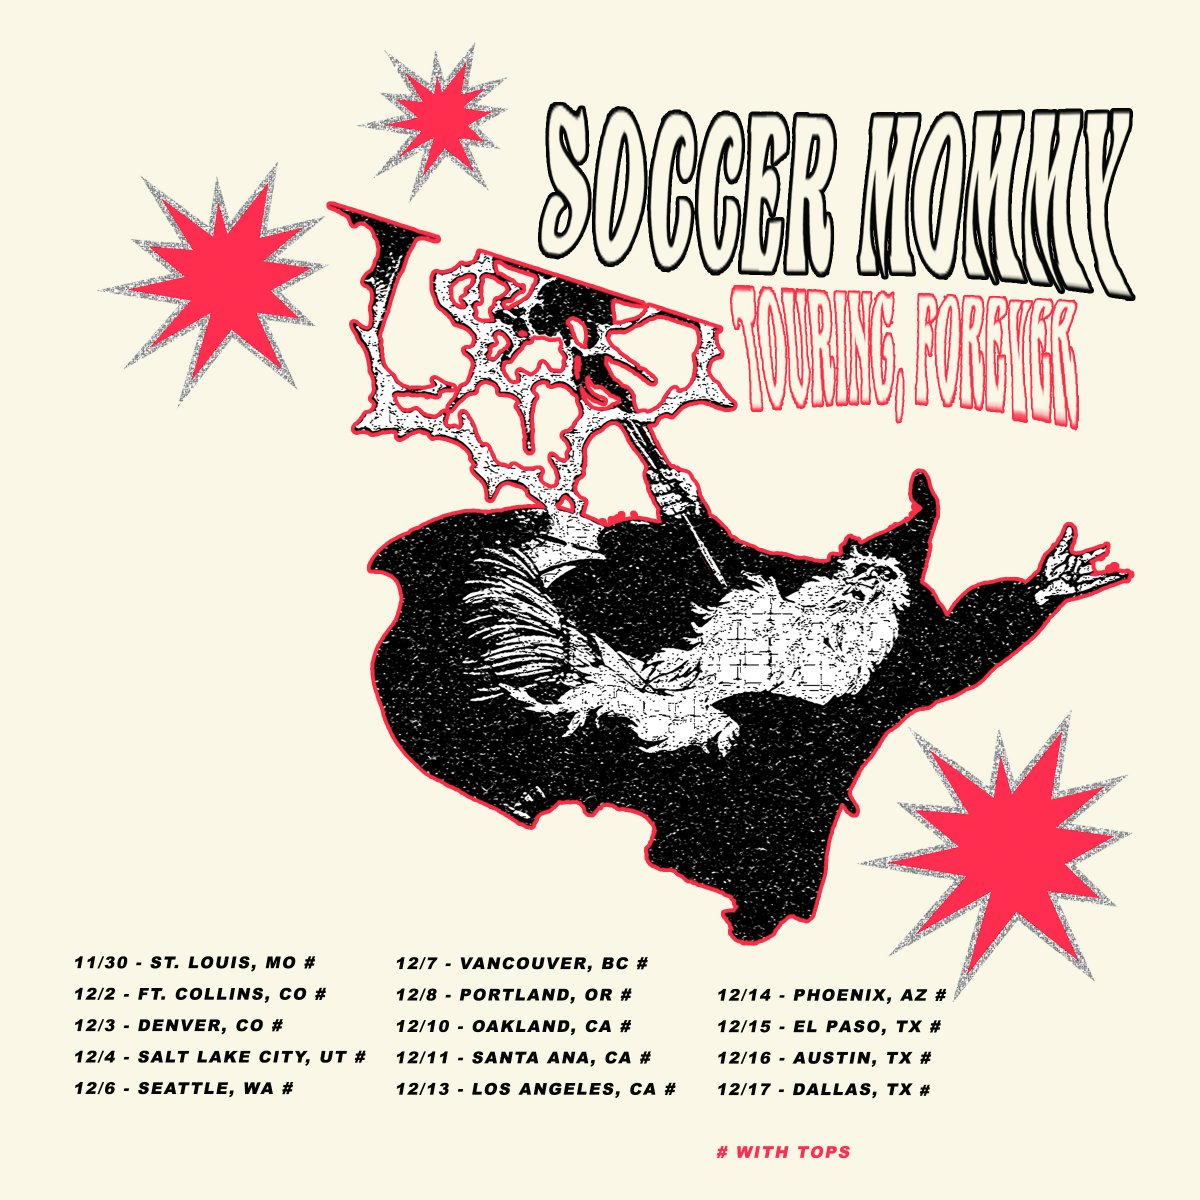 Second leg of my North America tour starts next week. Looking forward to @TTTOPSSS joining us on the road and seeing you all out there. Tickets: soccermommyband.com/#tour